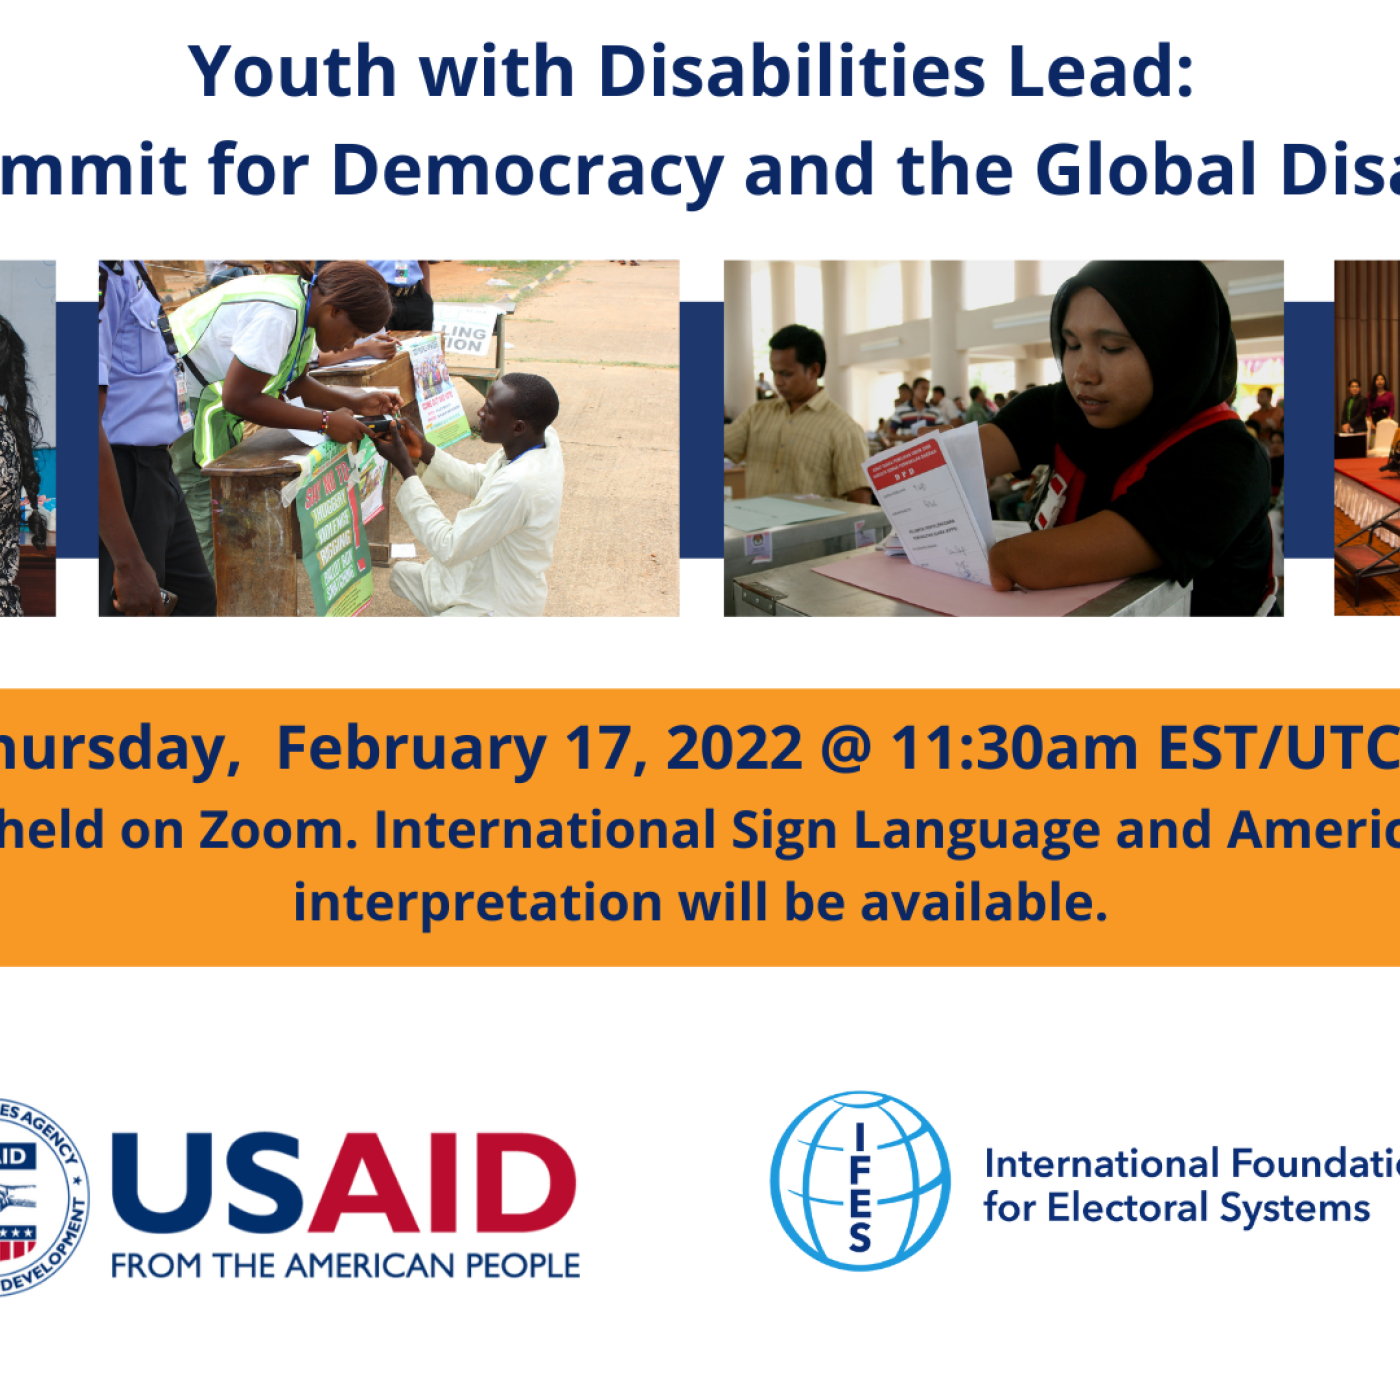 Youth With Disabilities Lead: Linking the Summit for Democracy and The Global Disability Summit - Thursday, February 17, 2022 @11:30 EST/UTC-5 The event will be held on zoom. ISL & ASL  Interpretation will be available.